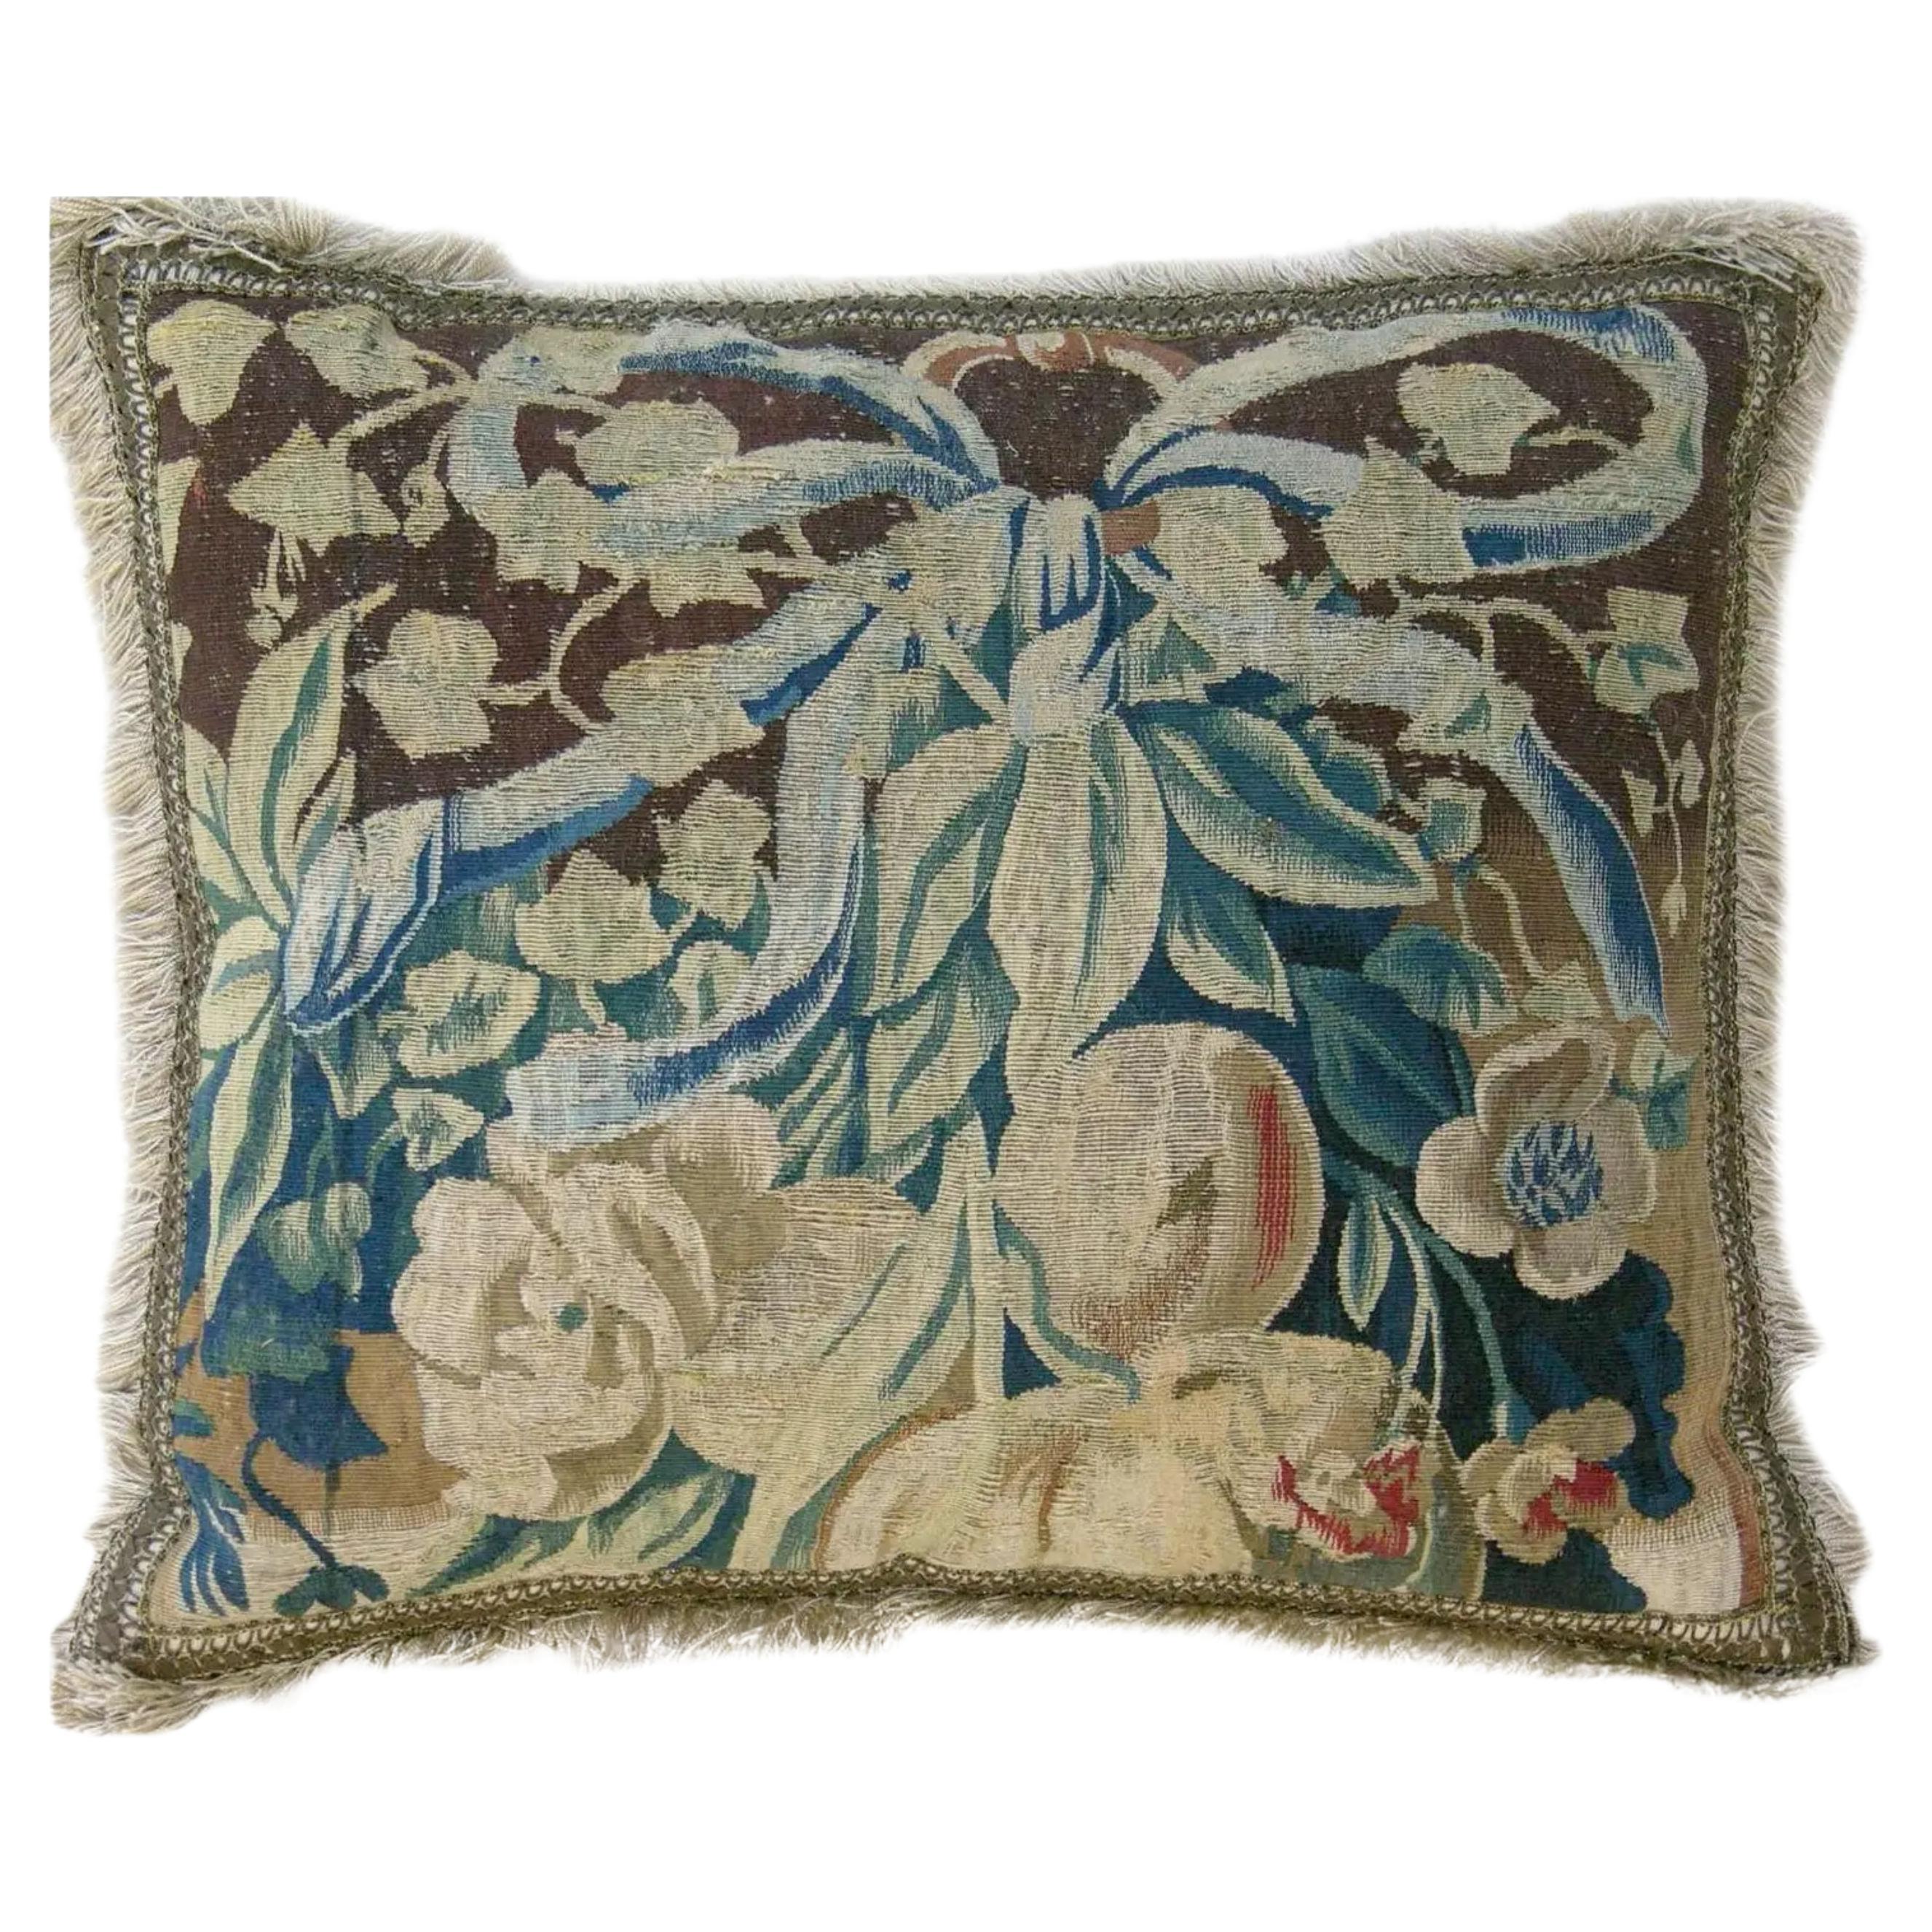 Antique 16th Century Brussels Tapestry Pillow - 23'' X 19''